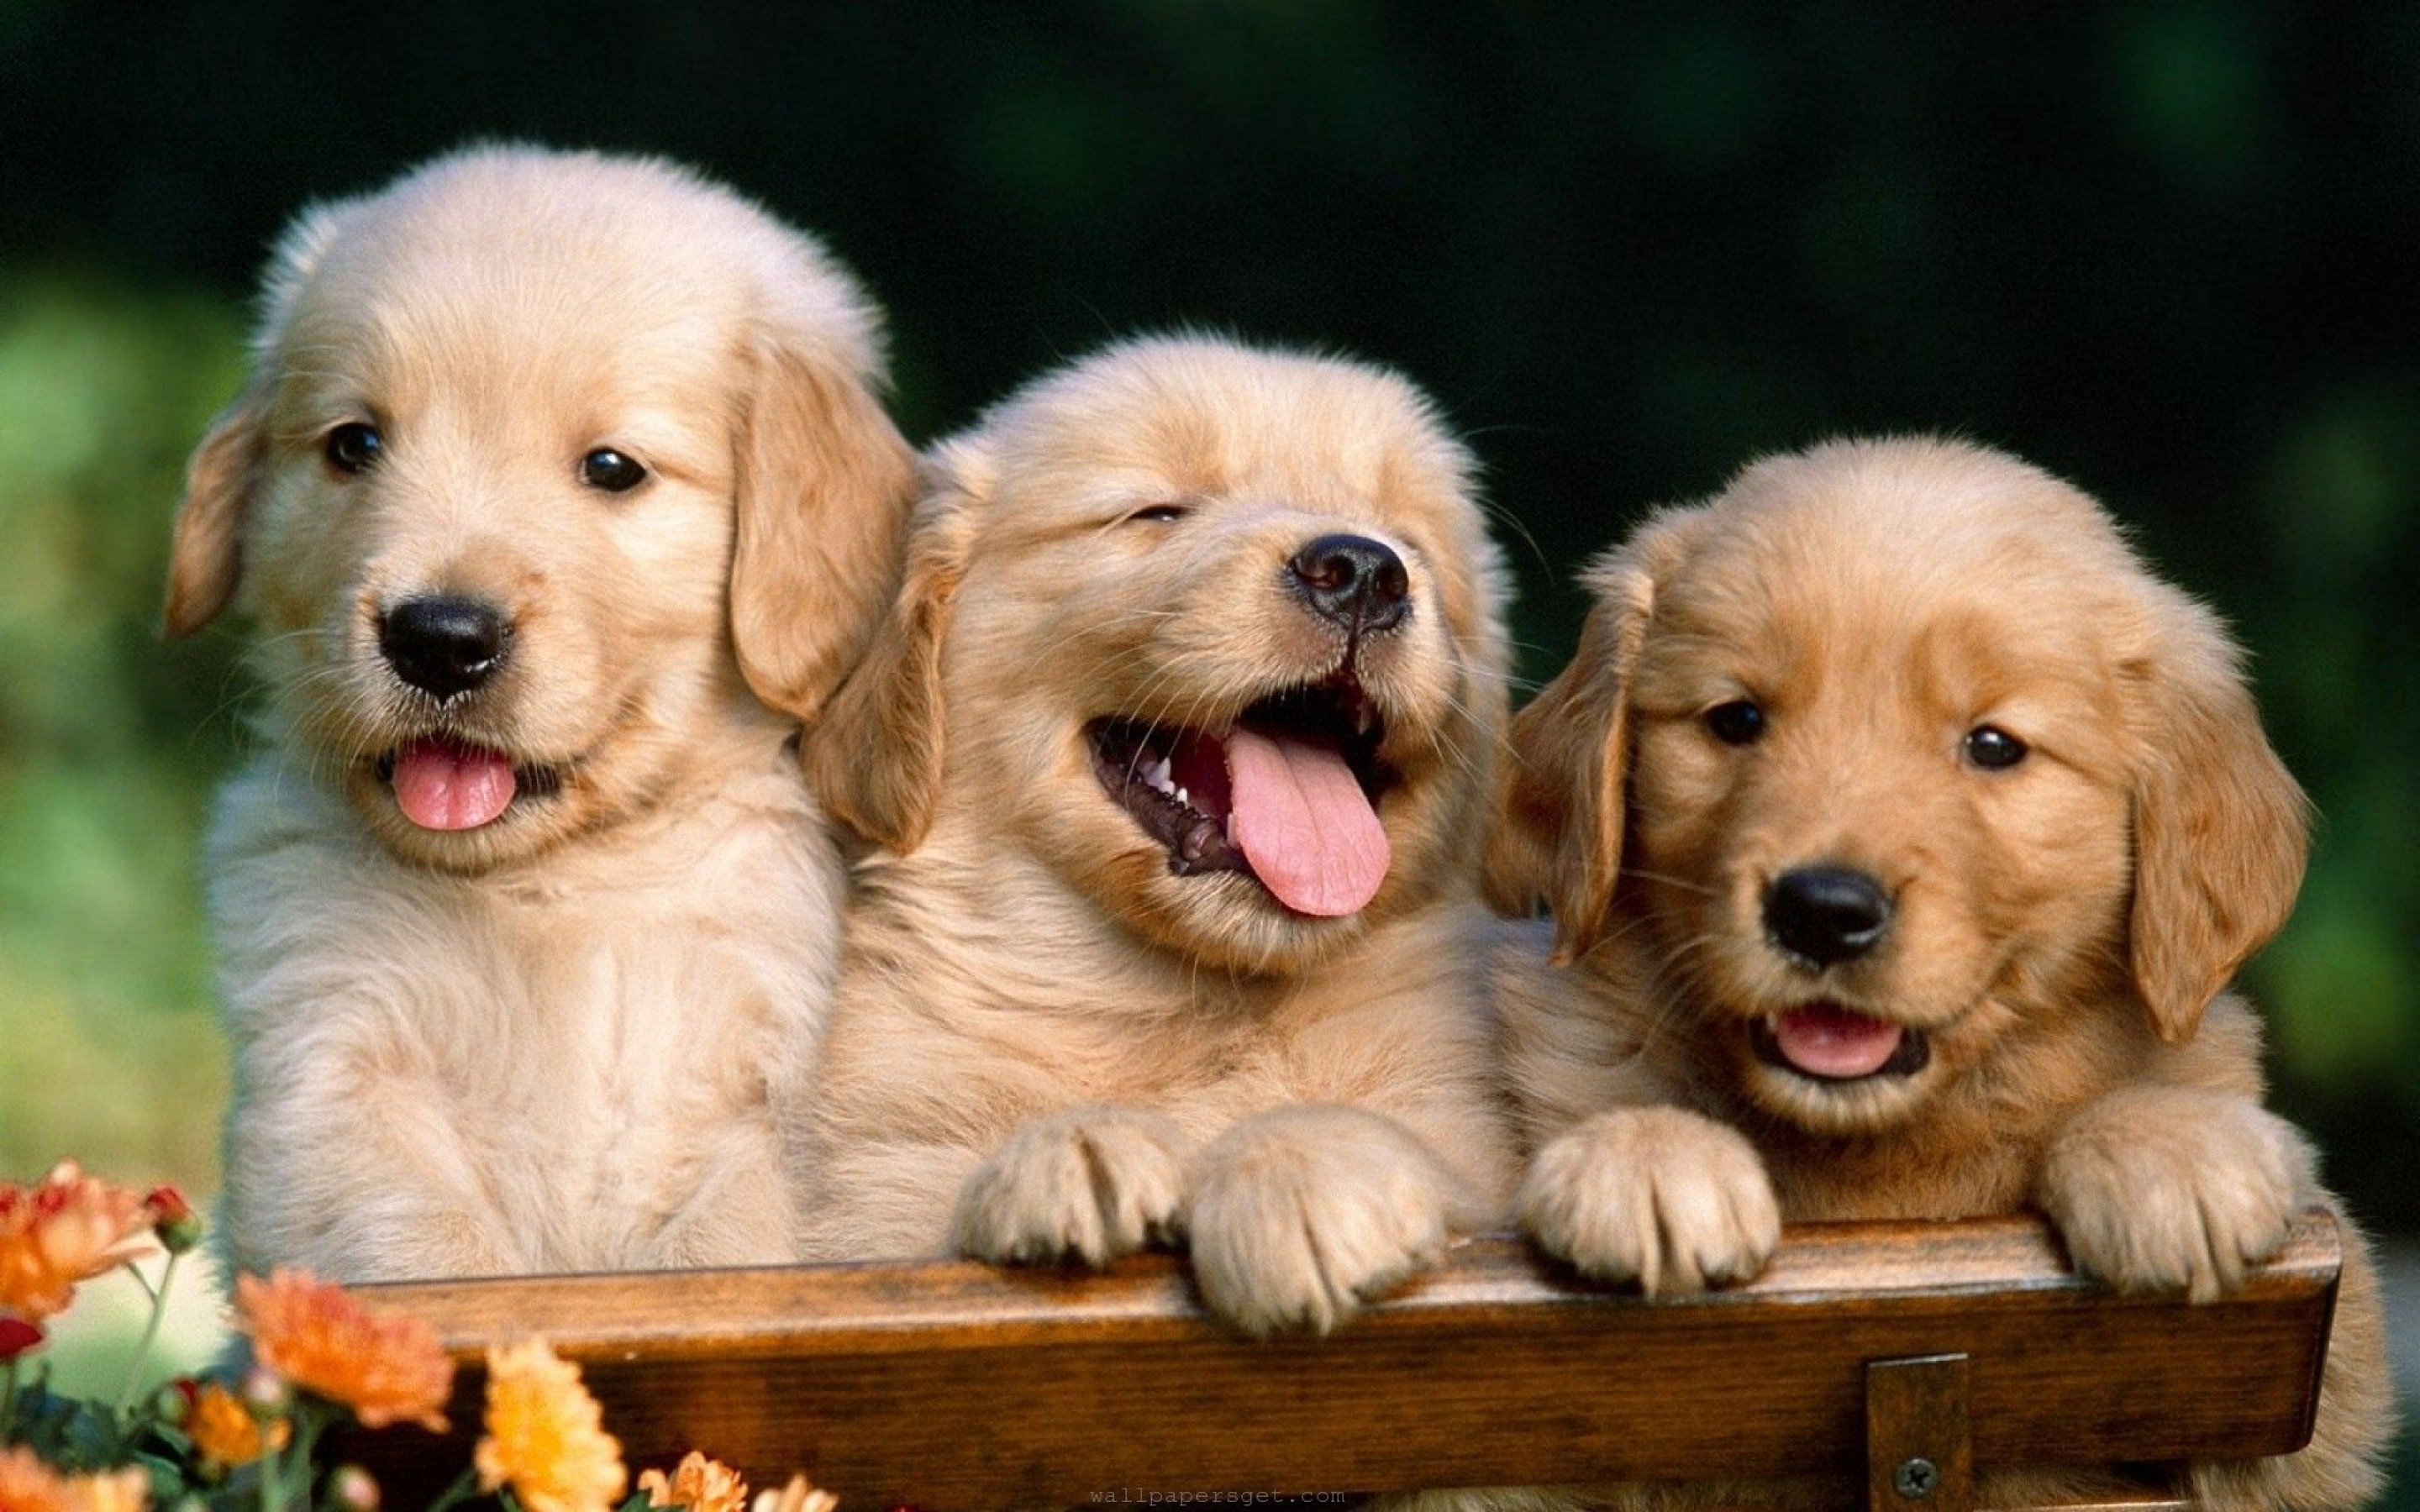 Download 38 Cute Dog Pictures - InspirationSeek.com